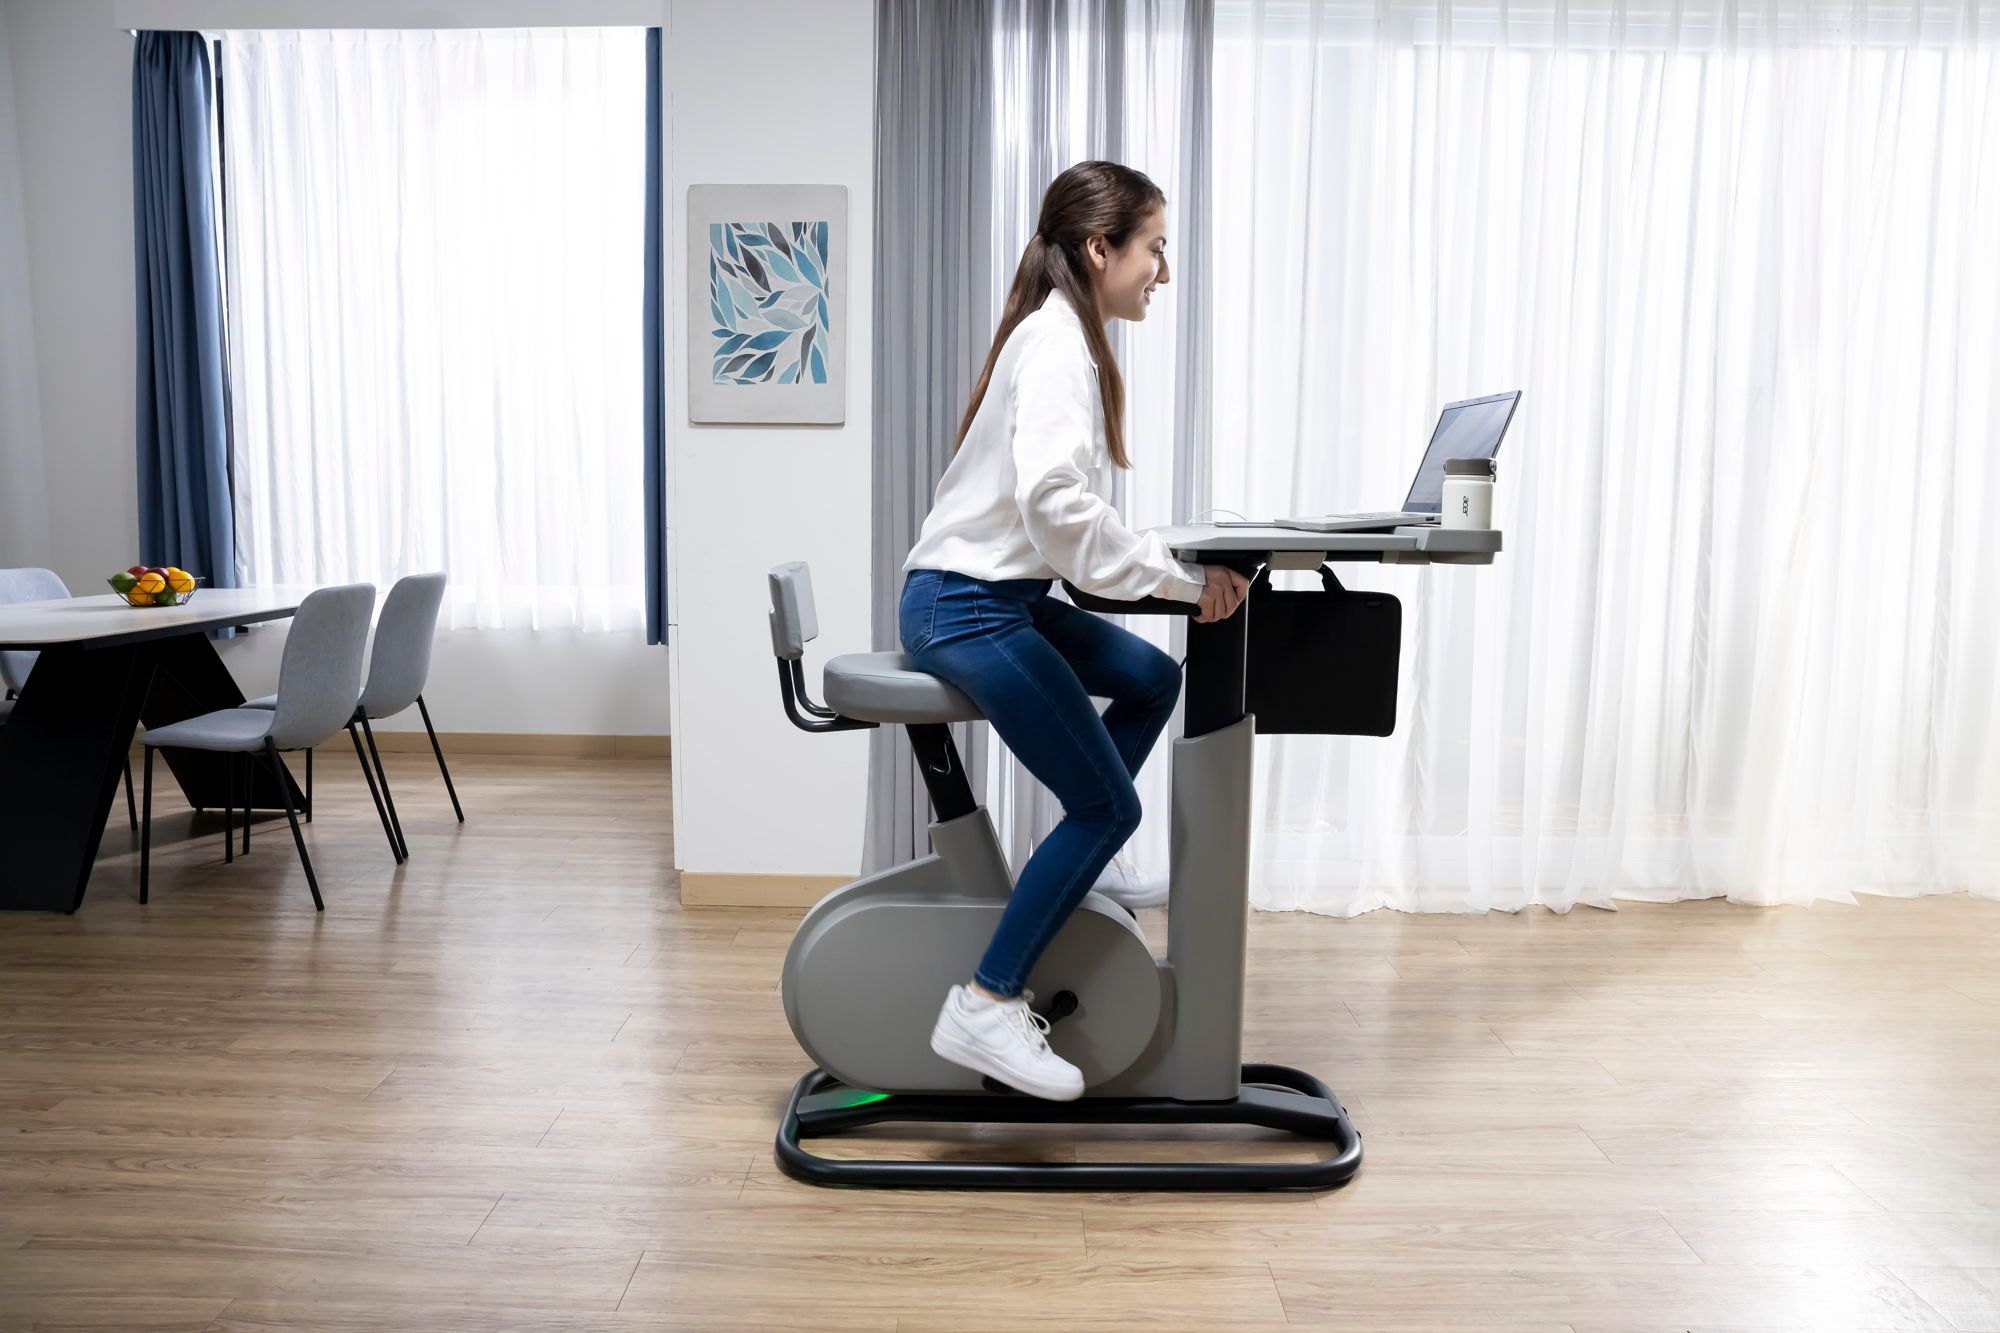 Acer’s unholy cycle-desk hybrid will literally make you work your ass off